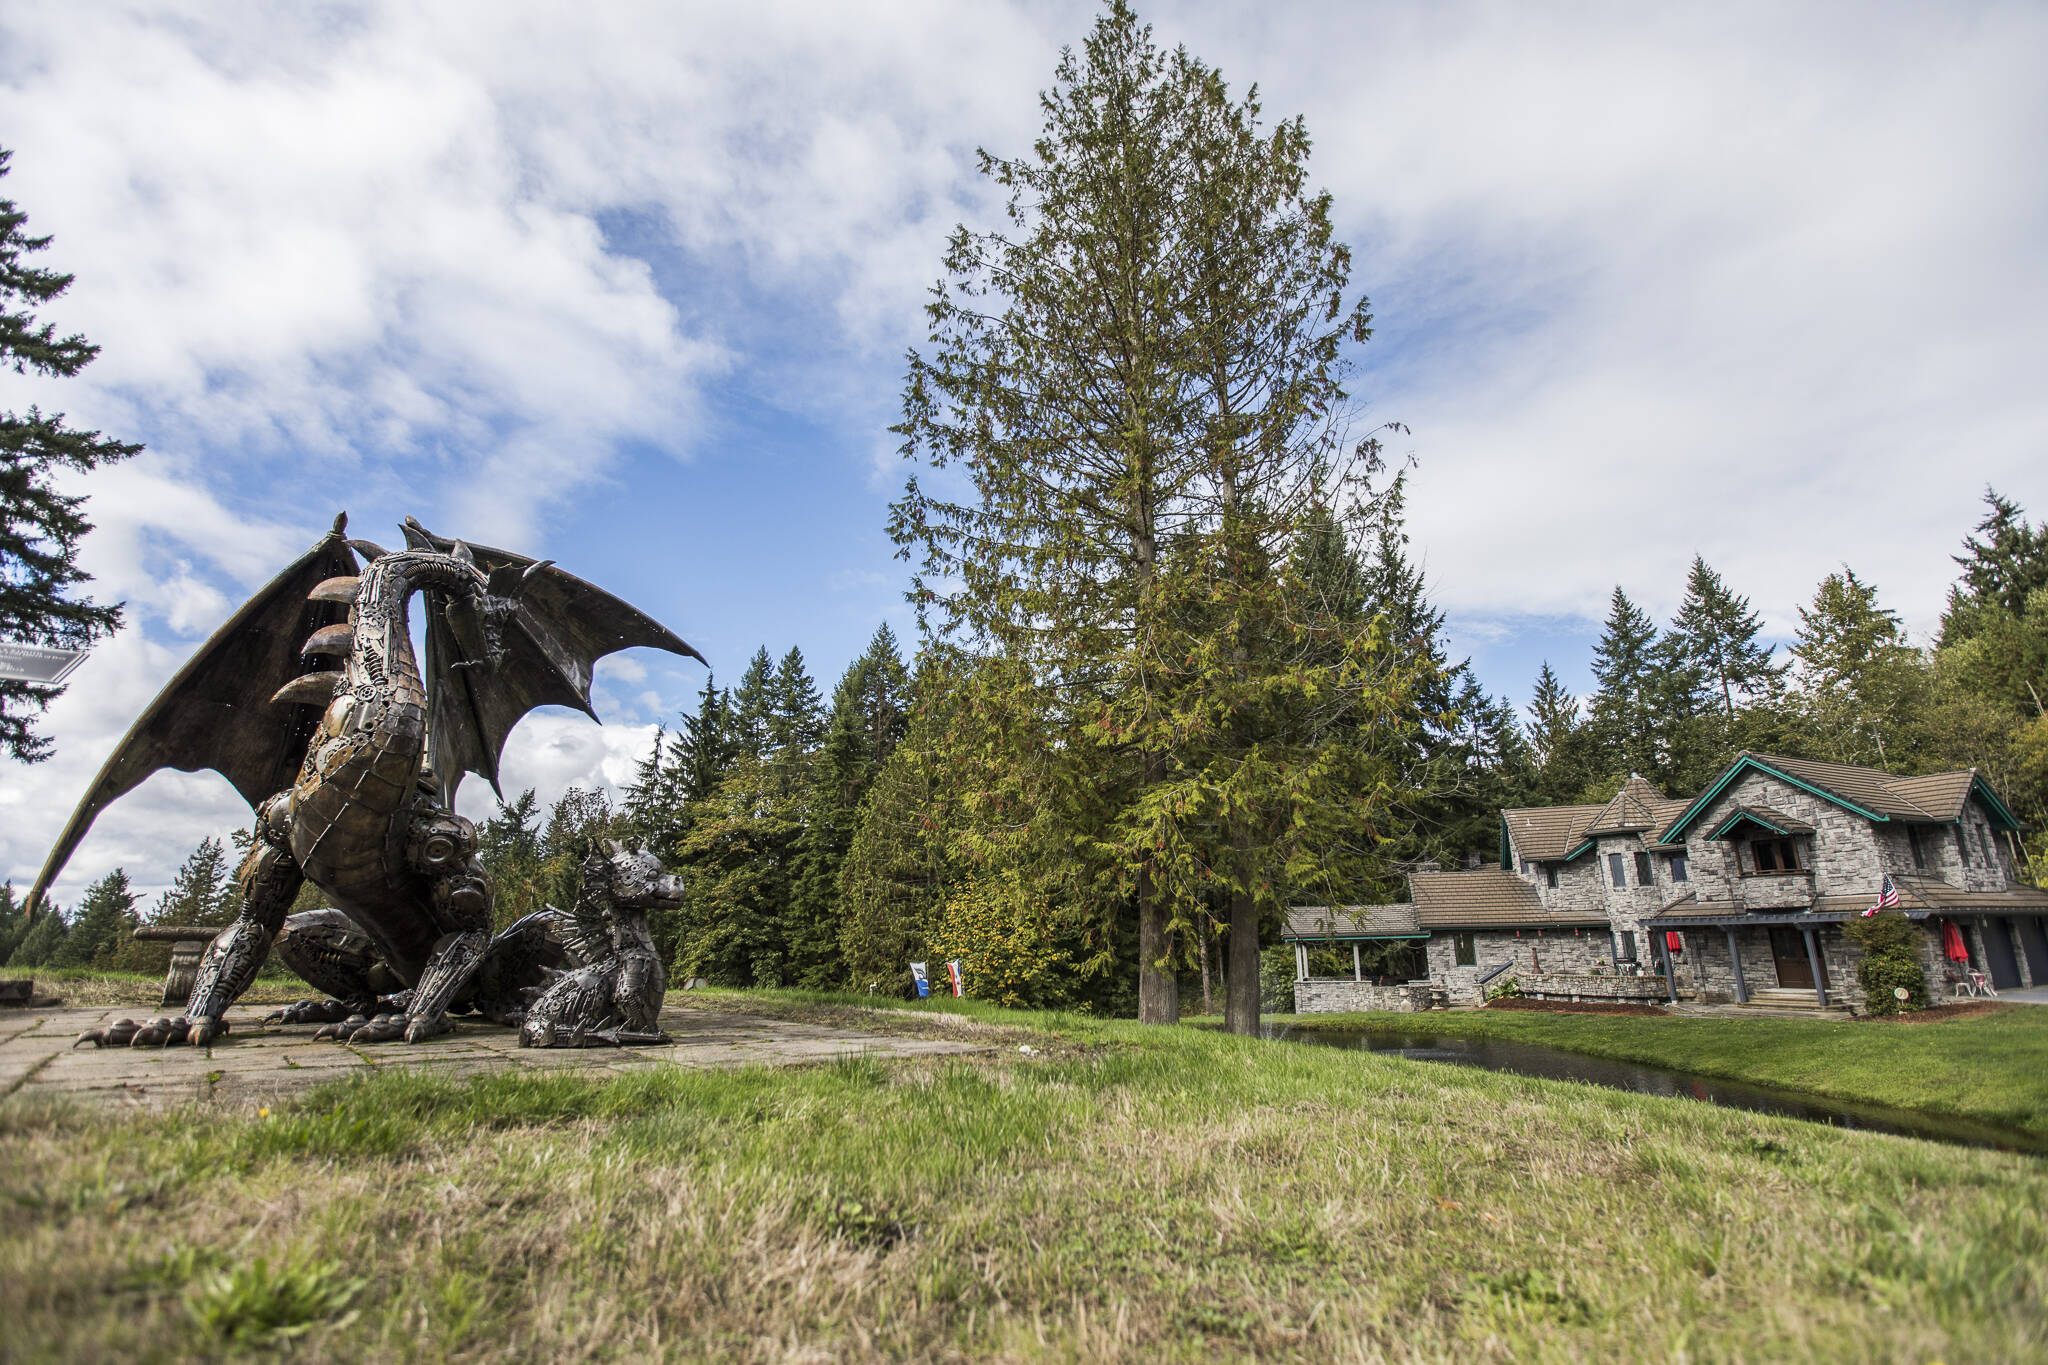 A dragon statue imported from Switzerland on display on the nearly 19-acre property. (Olivia Vanni / The Herald)